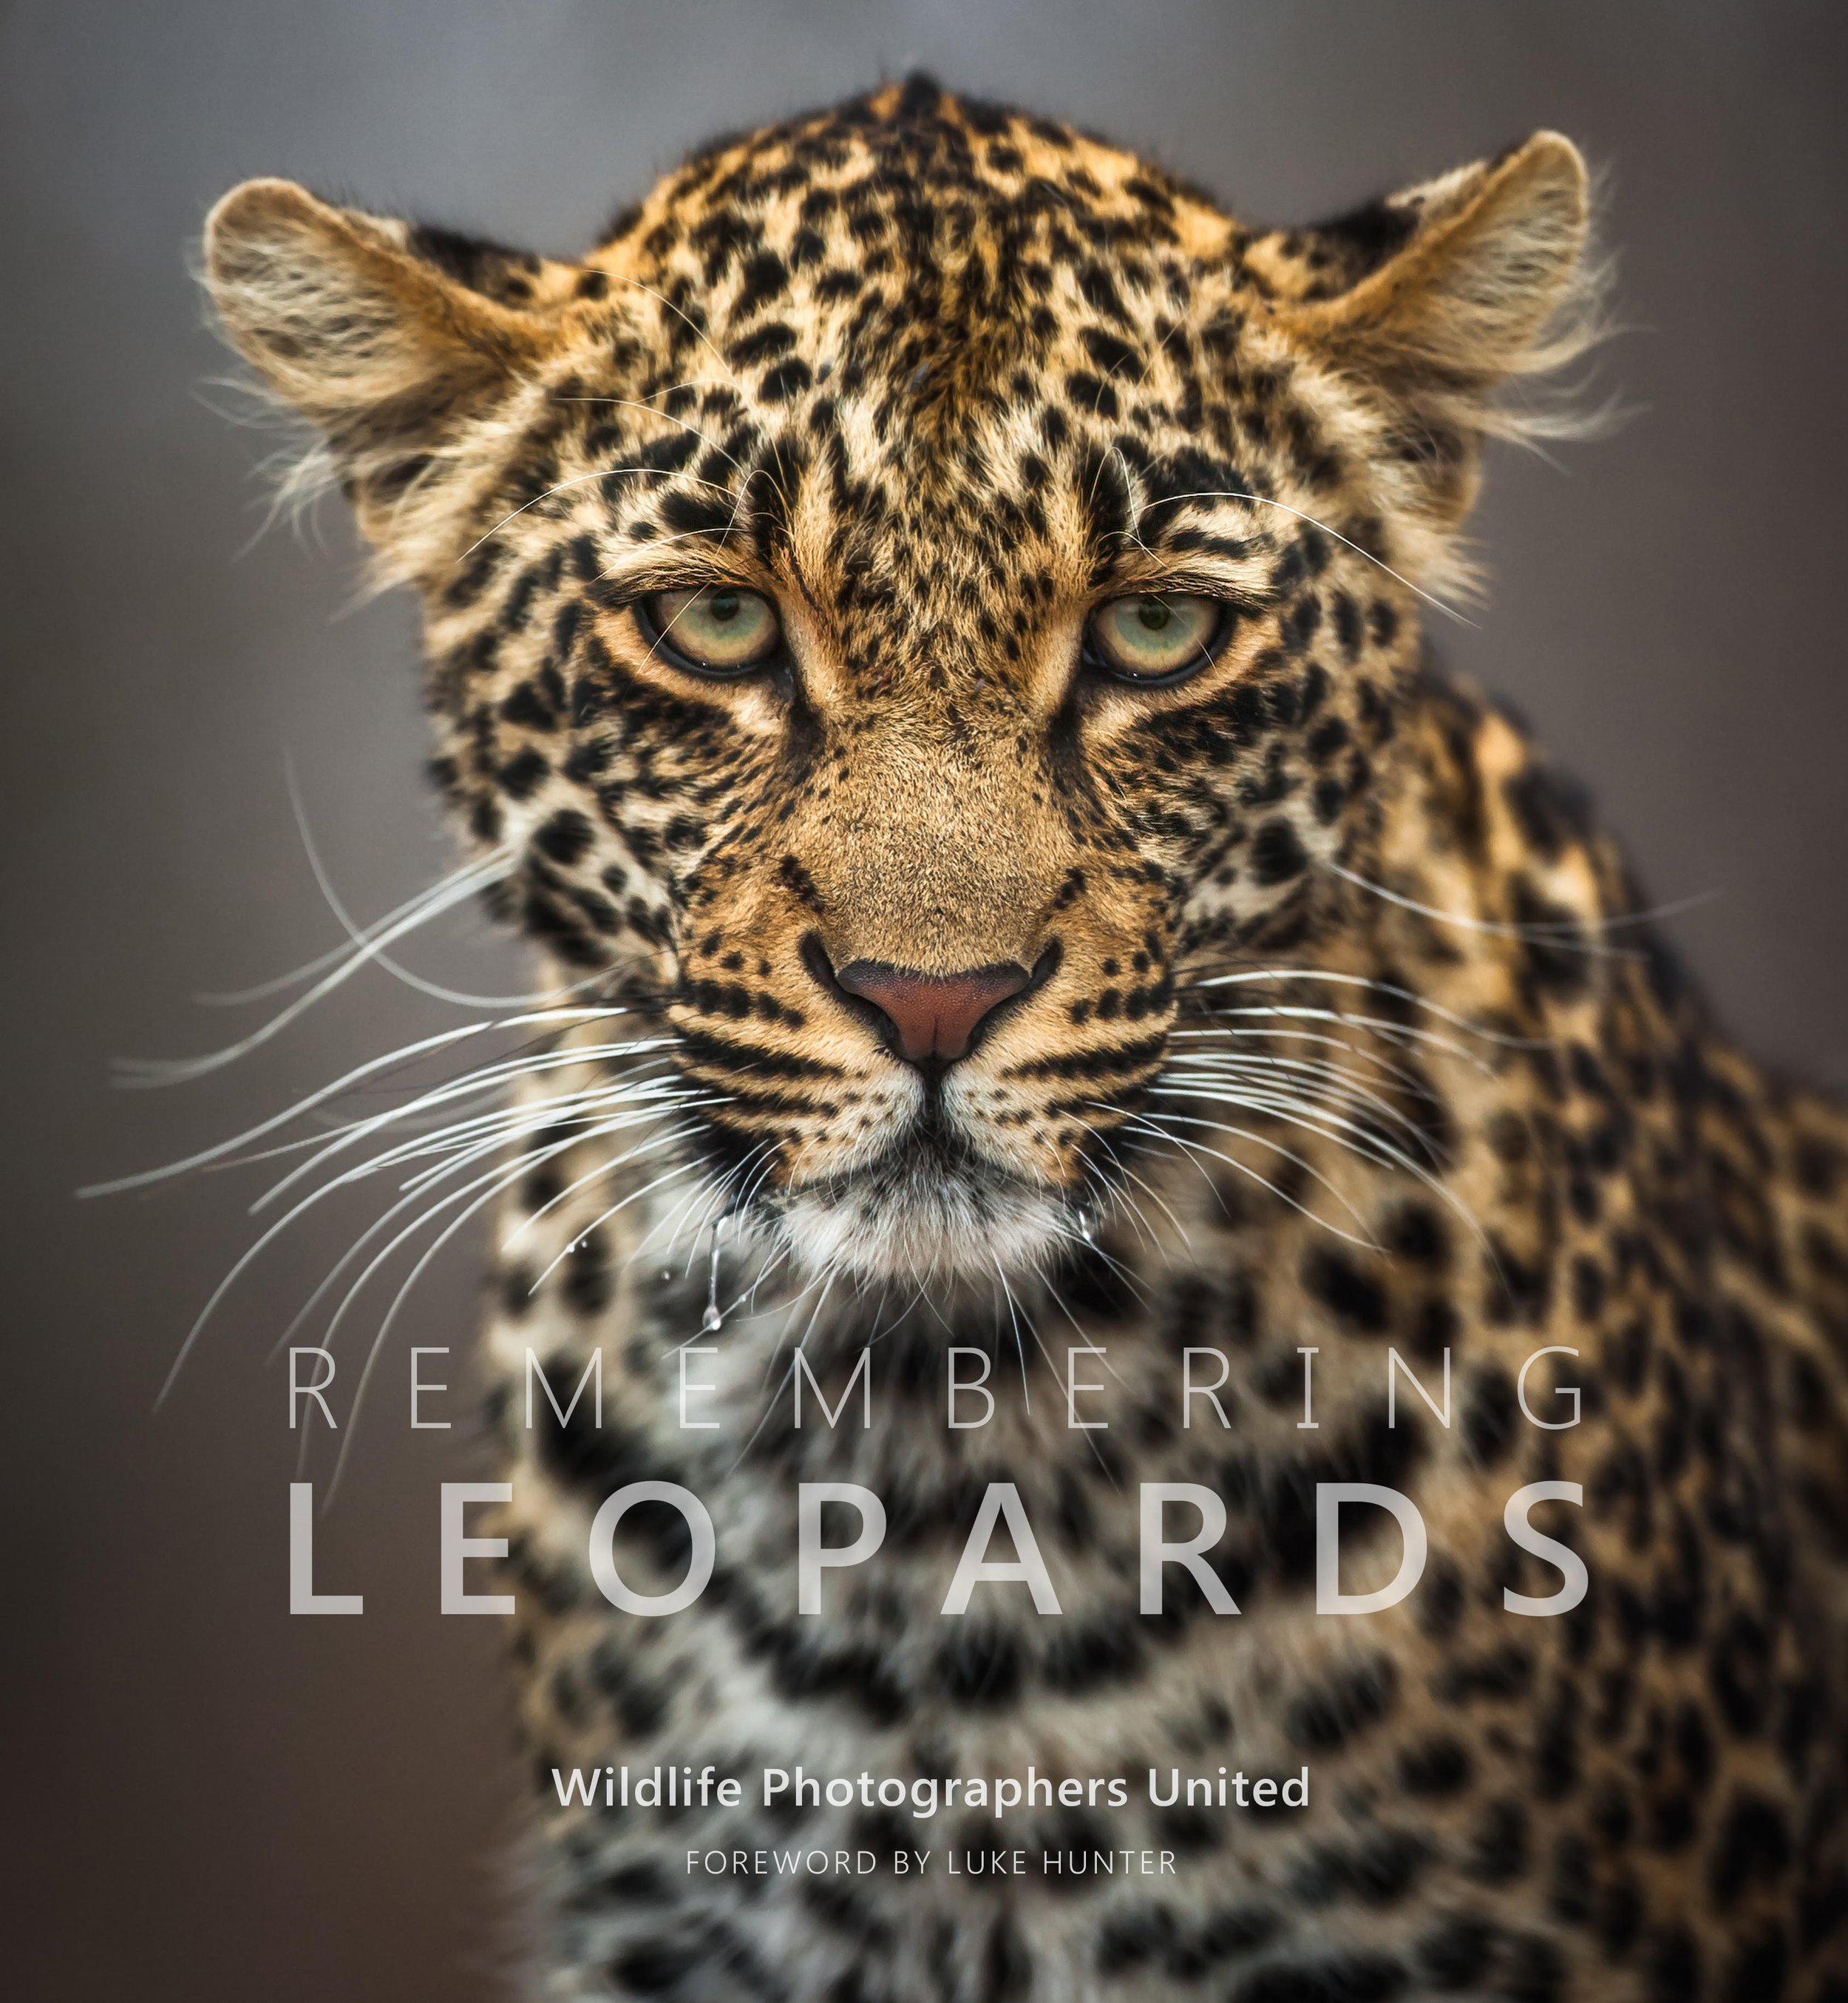 Remembering Leopards is the stunning eighth book in the Remembering Wildlife charity series. (Copy) (Copy) (Copy) (Copy) (Copy) (Copy) (Copy) (Copy) (Copy) (Copy) (Copy) (Copy)